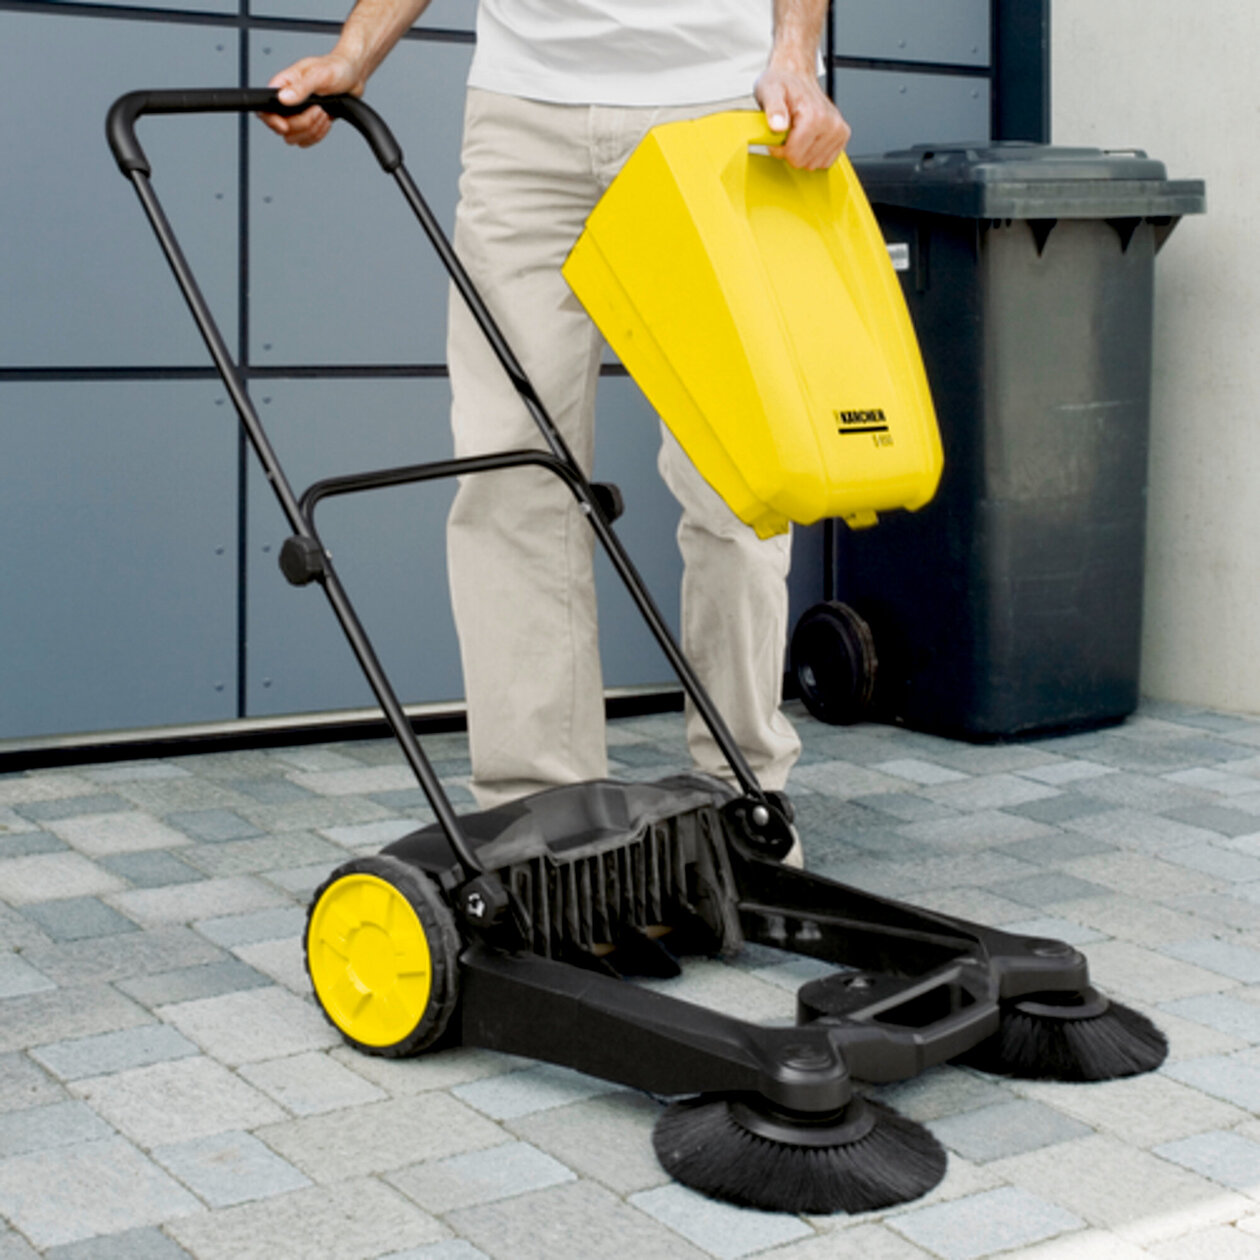 Push sweeper S 650: No contact with dirt